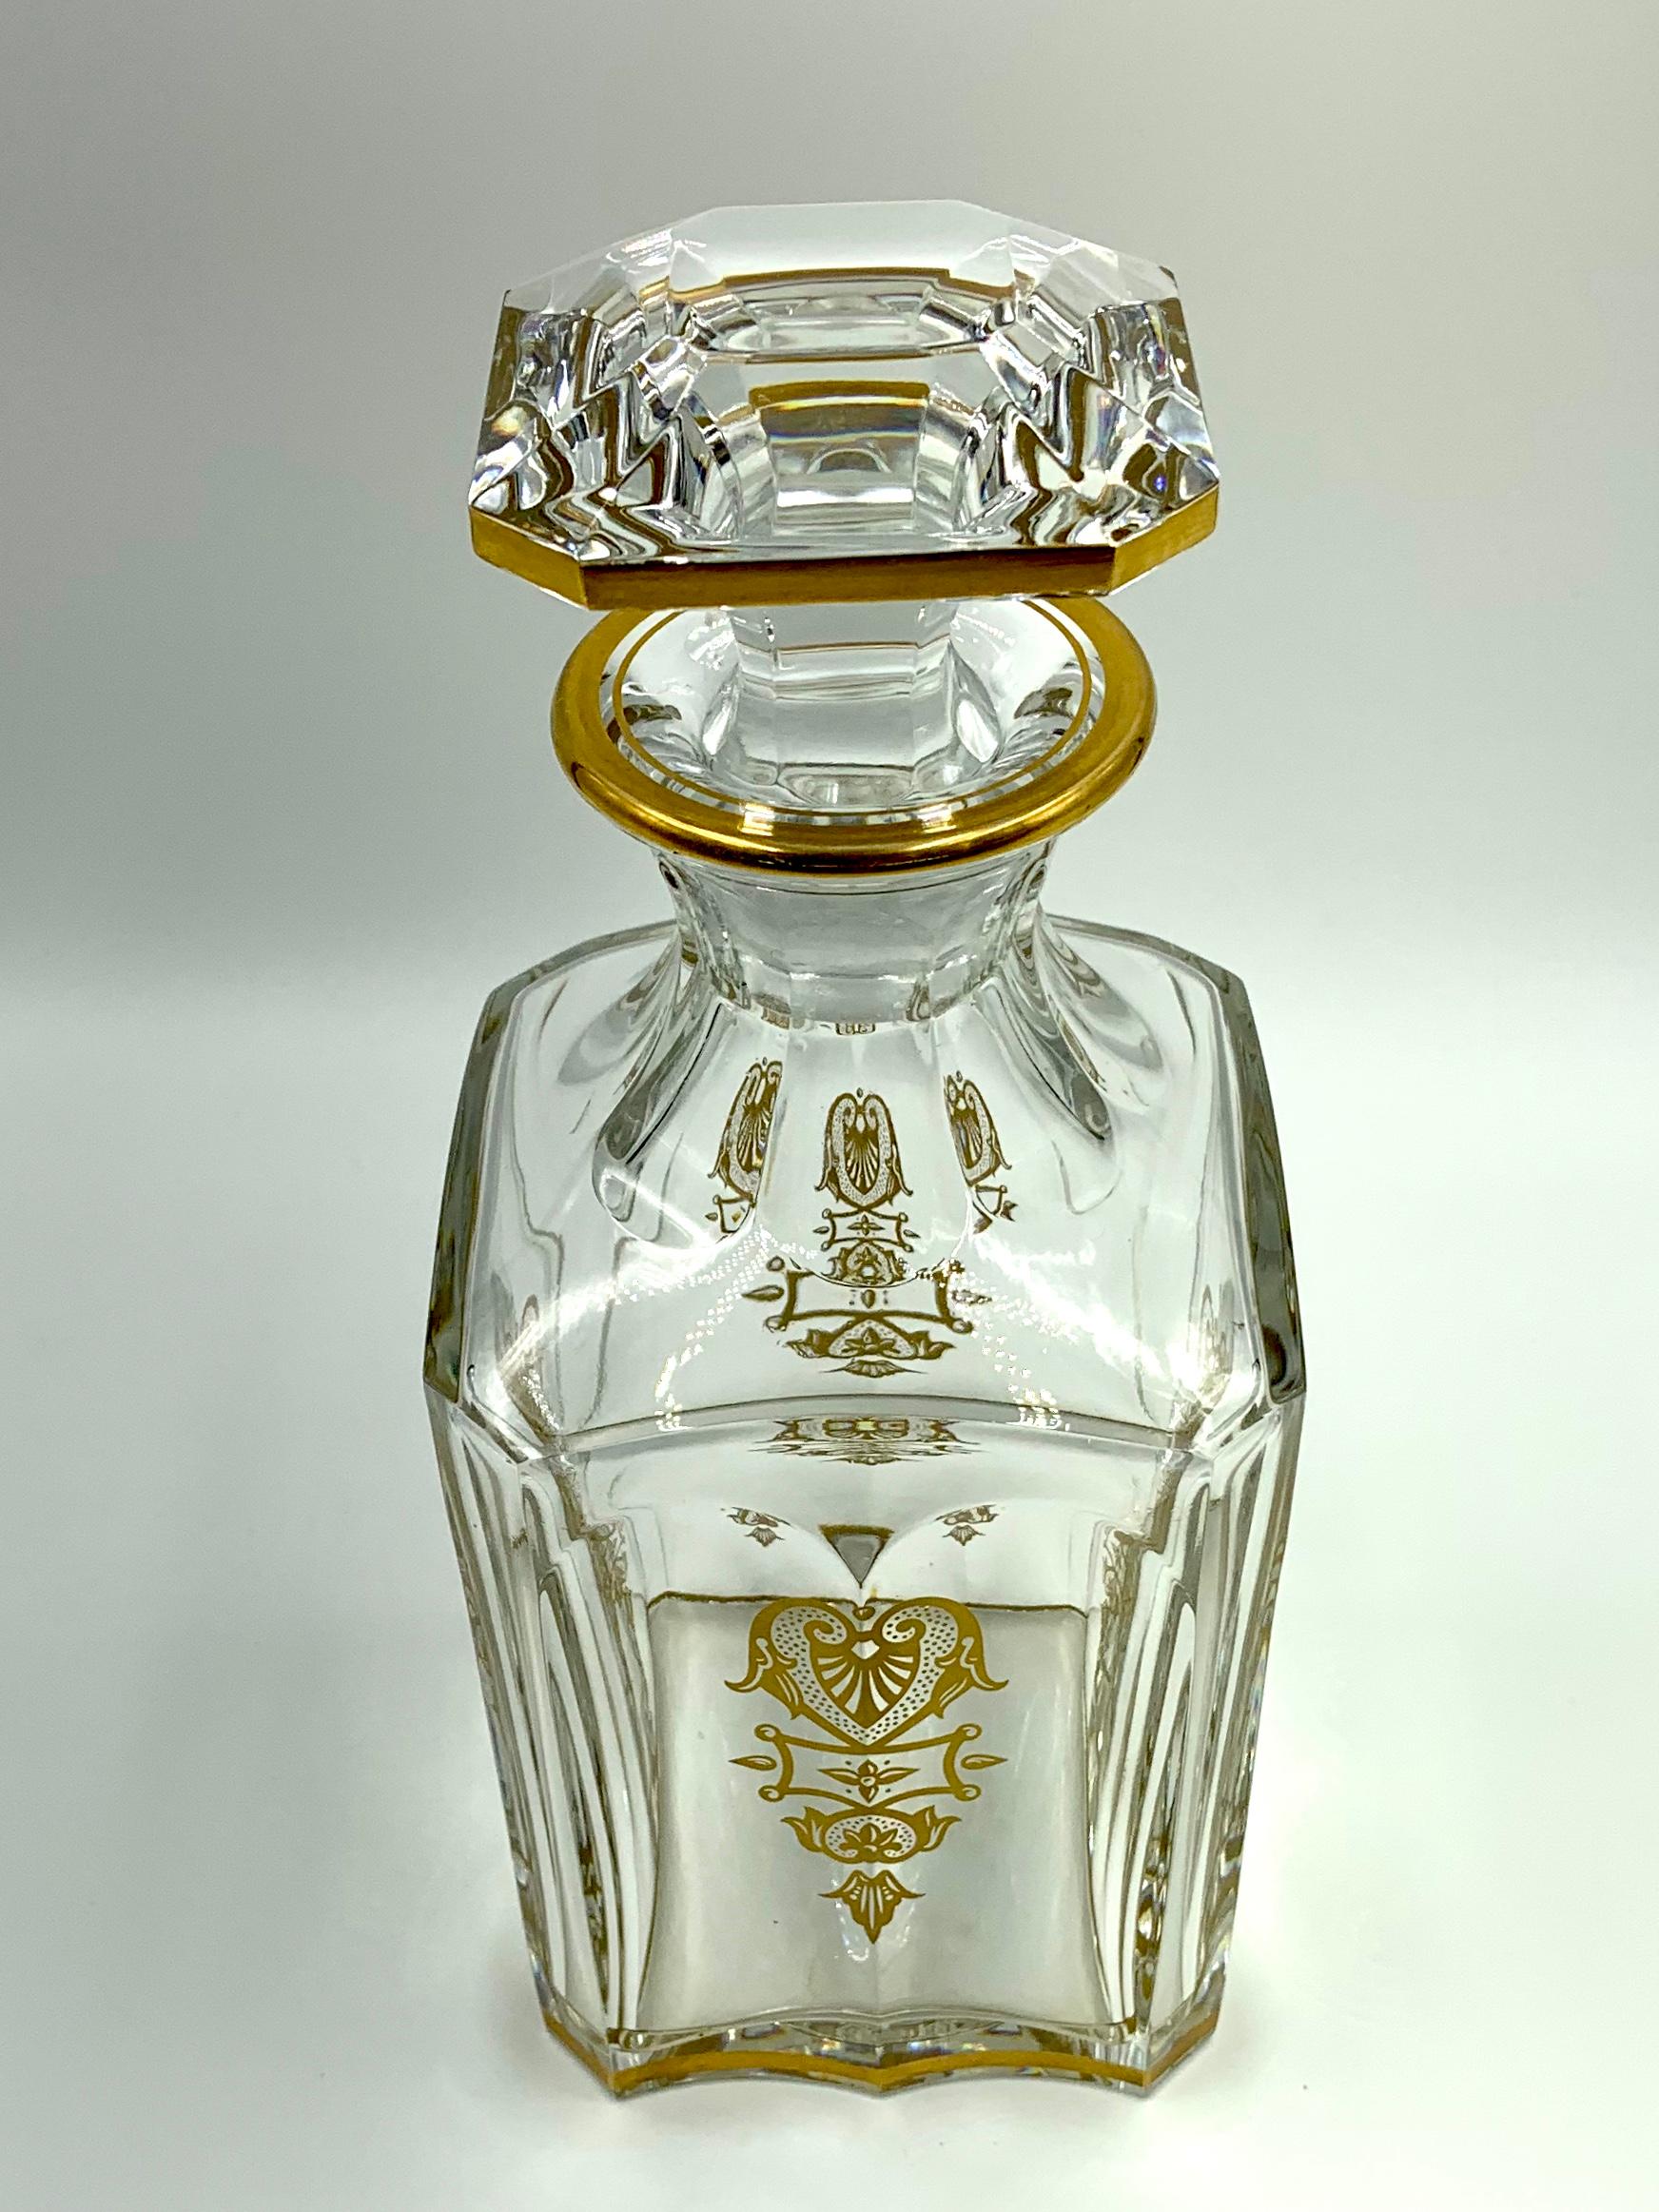 Baccarat Crystal Harcourt 1841 Empire Whiskey Decanter 1